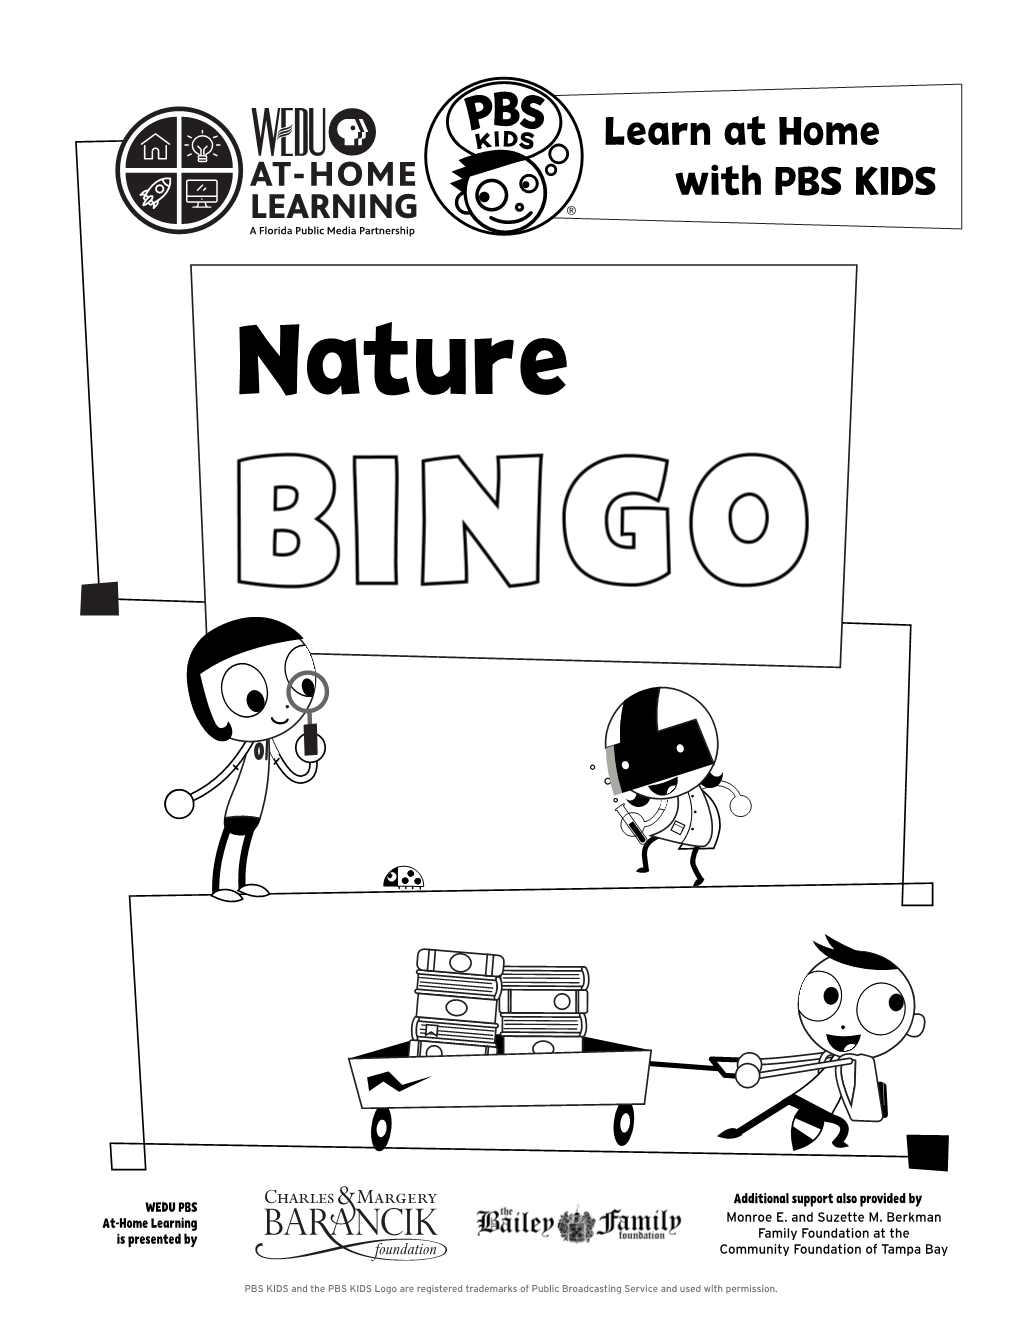 PBS KIDS and the PBS KIDS Logo Are Registered Trademarks of Public Broadcasting Service and Used with Permission